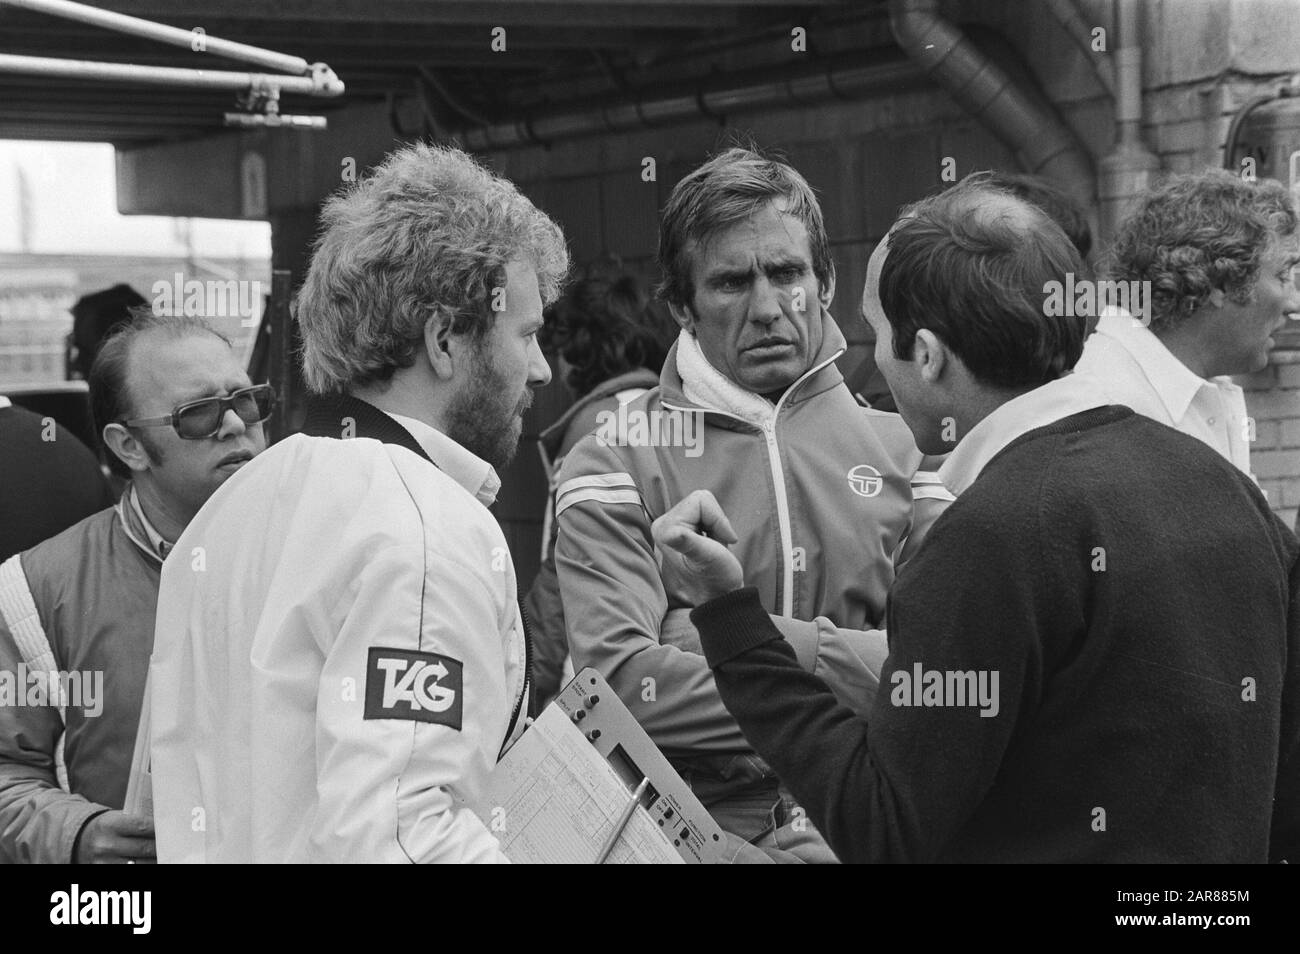 Team owner Frank Williams (right) in conversation with Williams-Ford Formula One driver Carlos Reutemann (middle) during the training of the Zandvoort Grand Prix in 1981.; Stock Photo